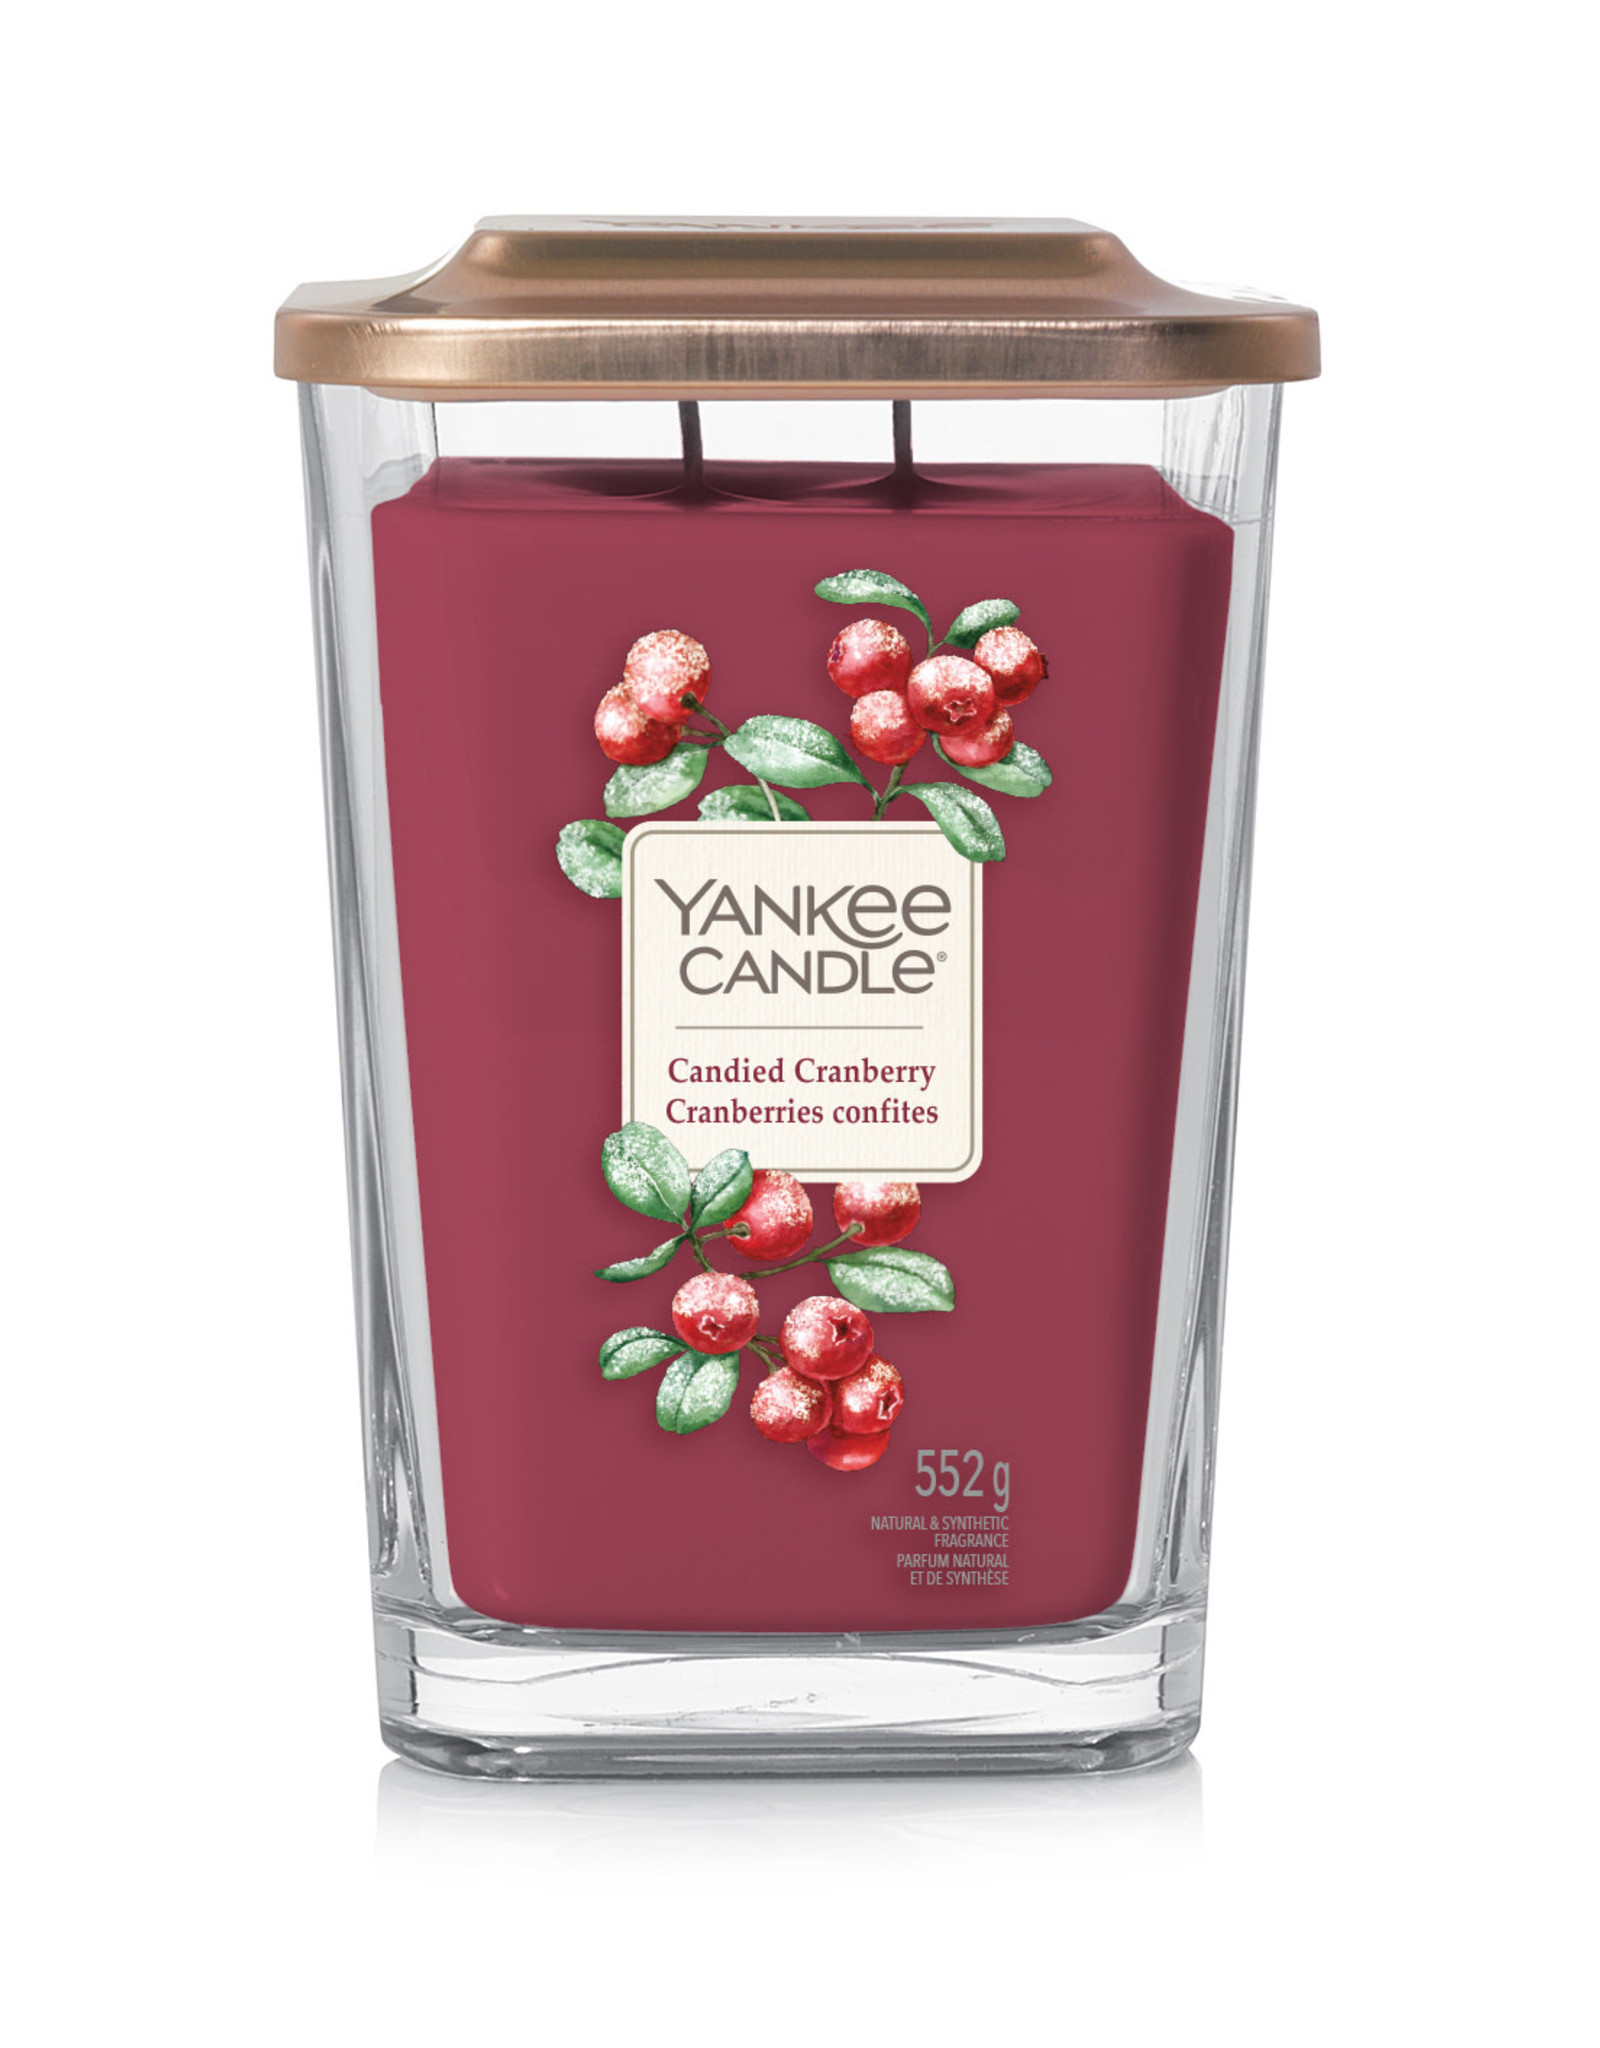 Yankee Candle Candied Cranberry -  Large Vessel